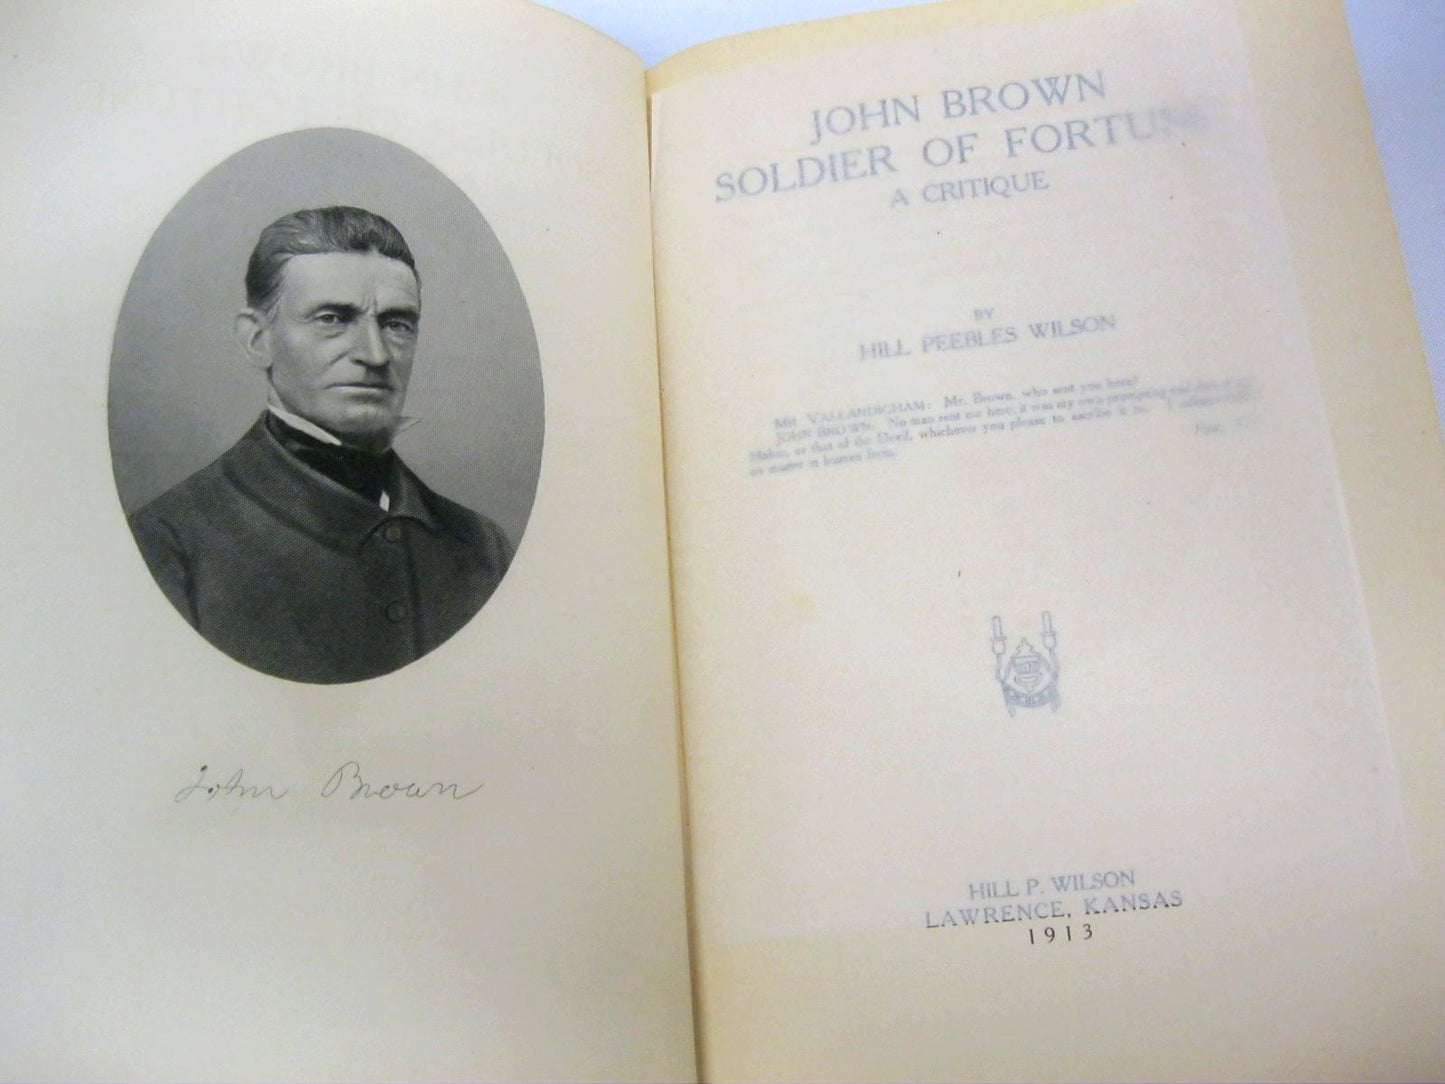 John Brown, Soldier of Fortune; a Critique by Hill Peebles Wilson